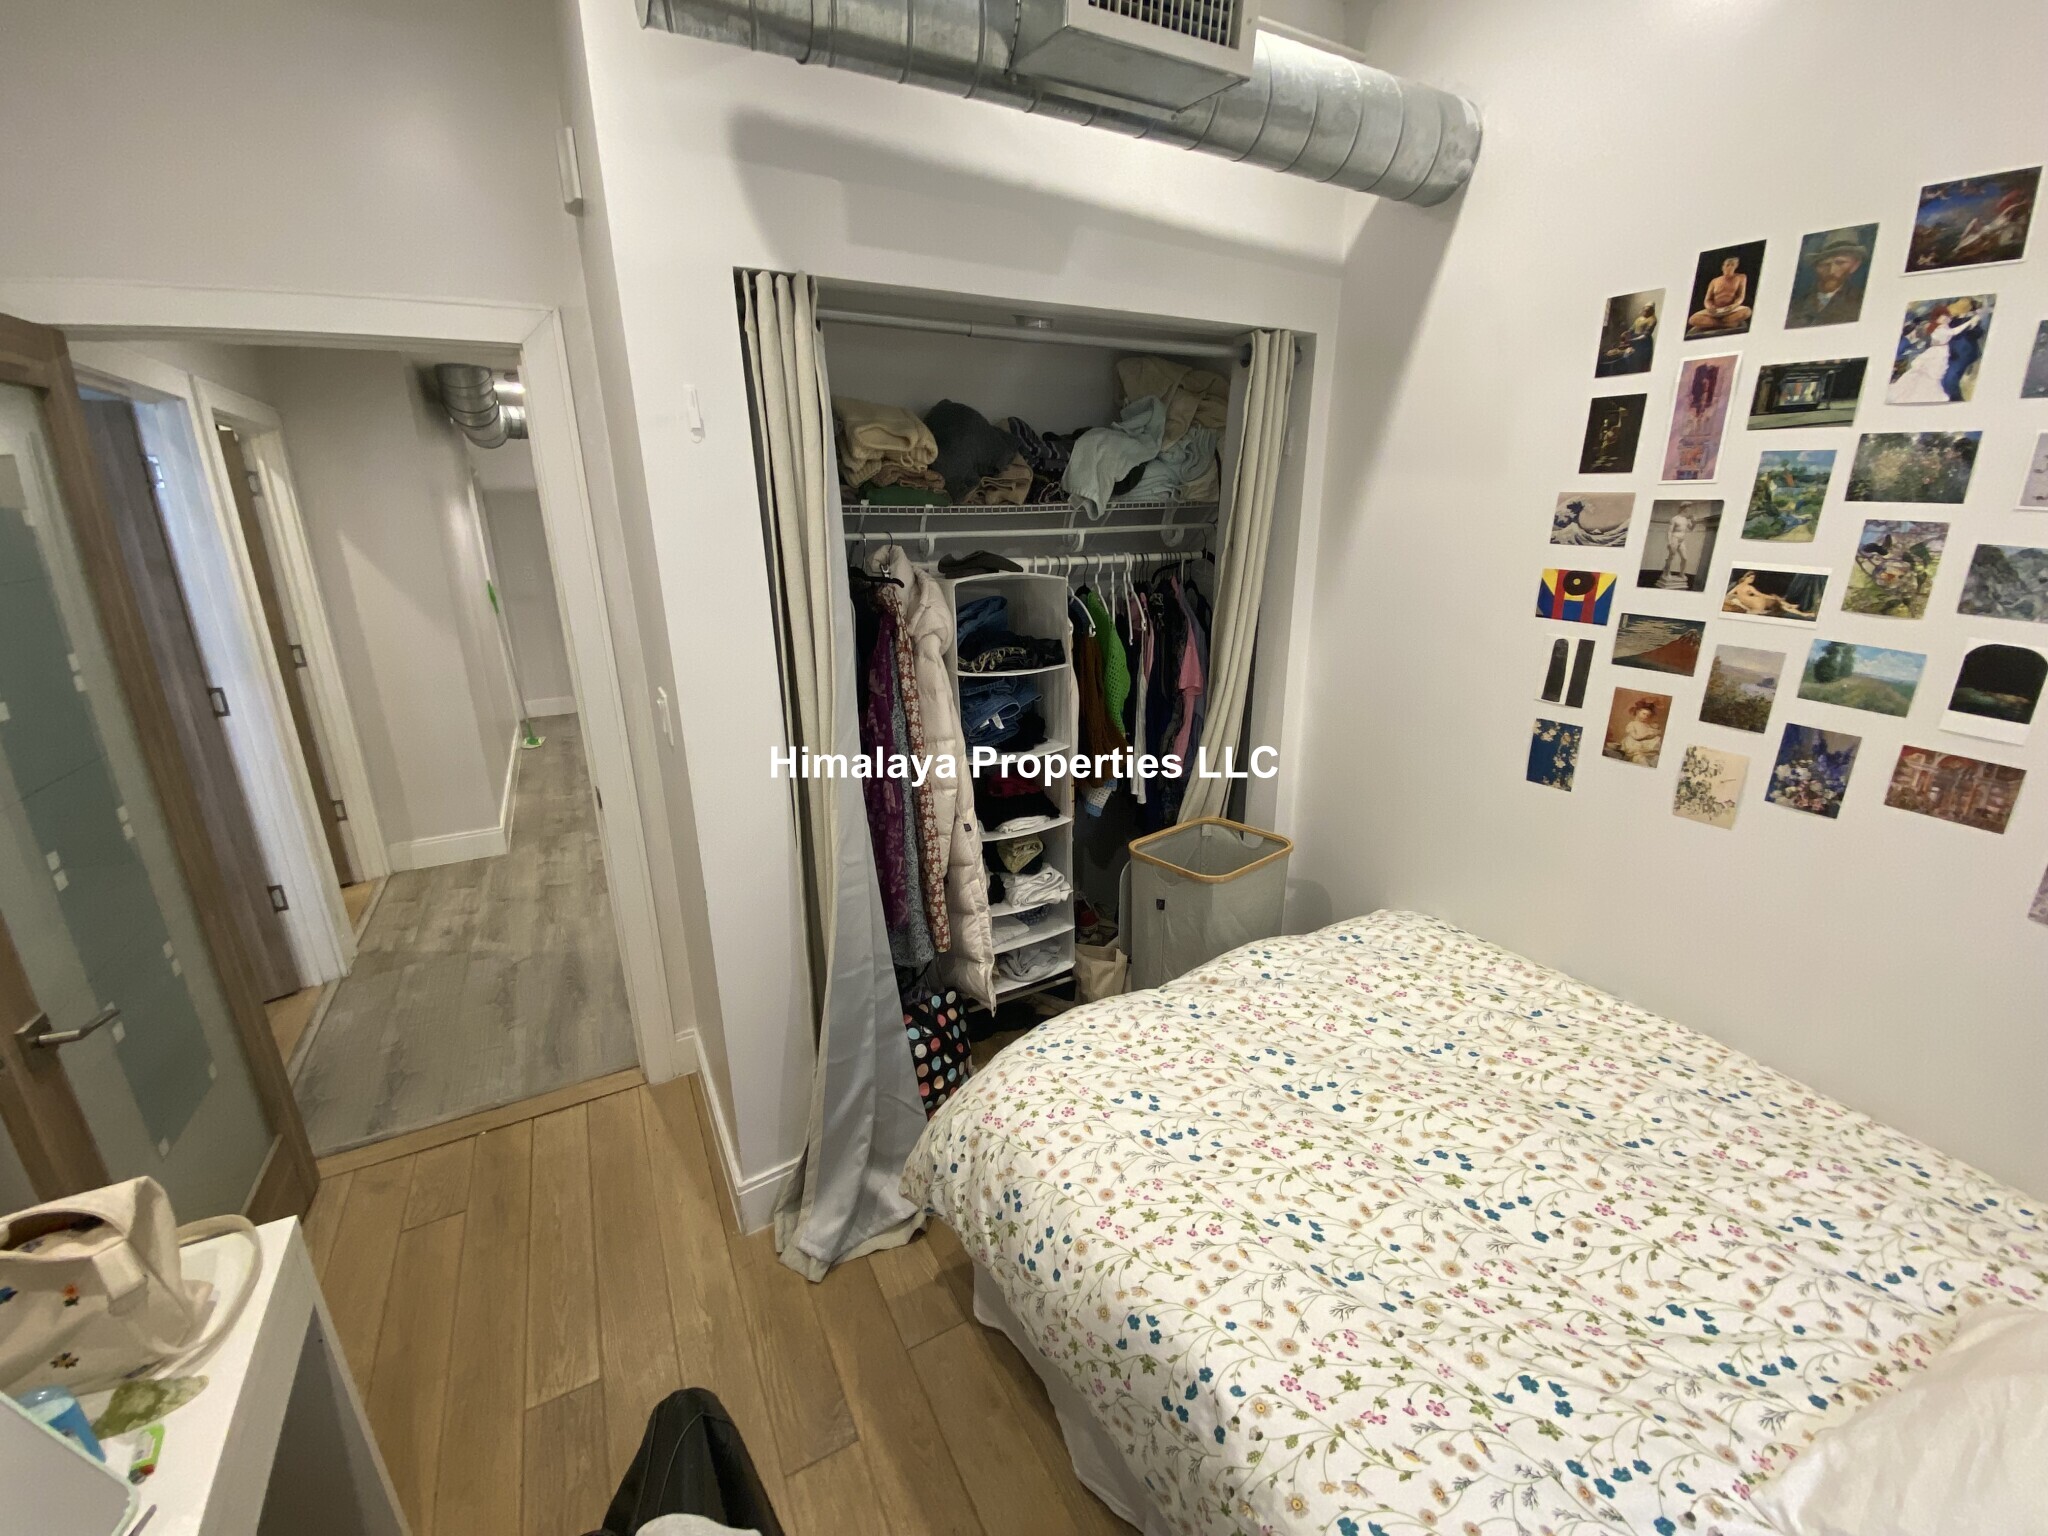 Photos of apartment on Dudley St.,Boston MA 02119